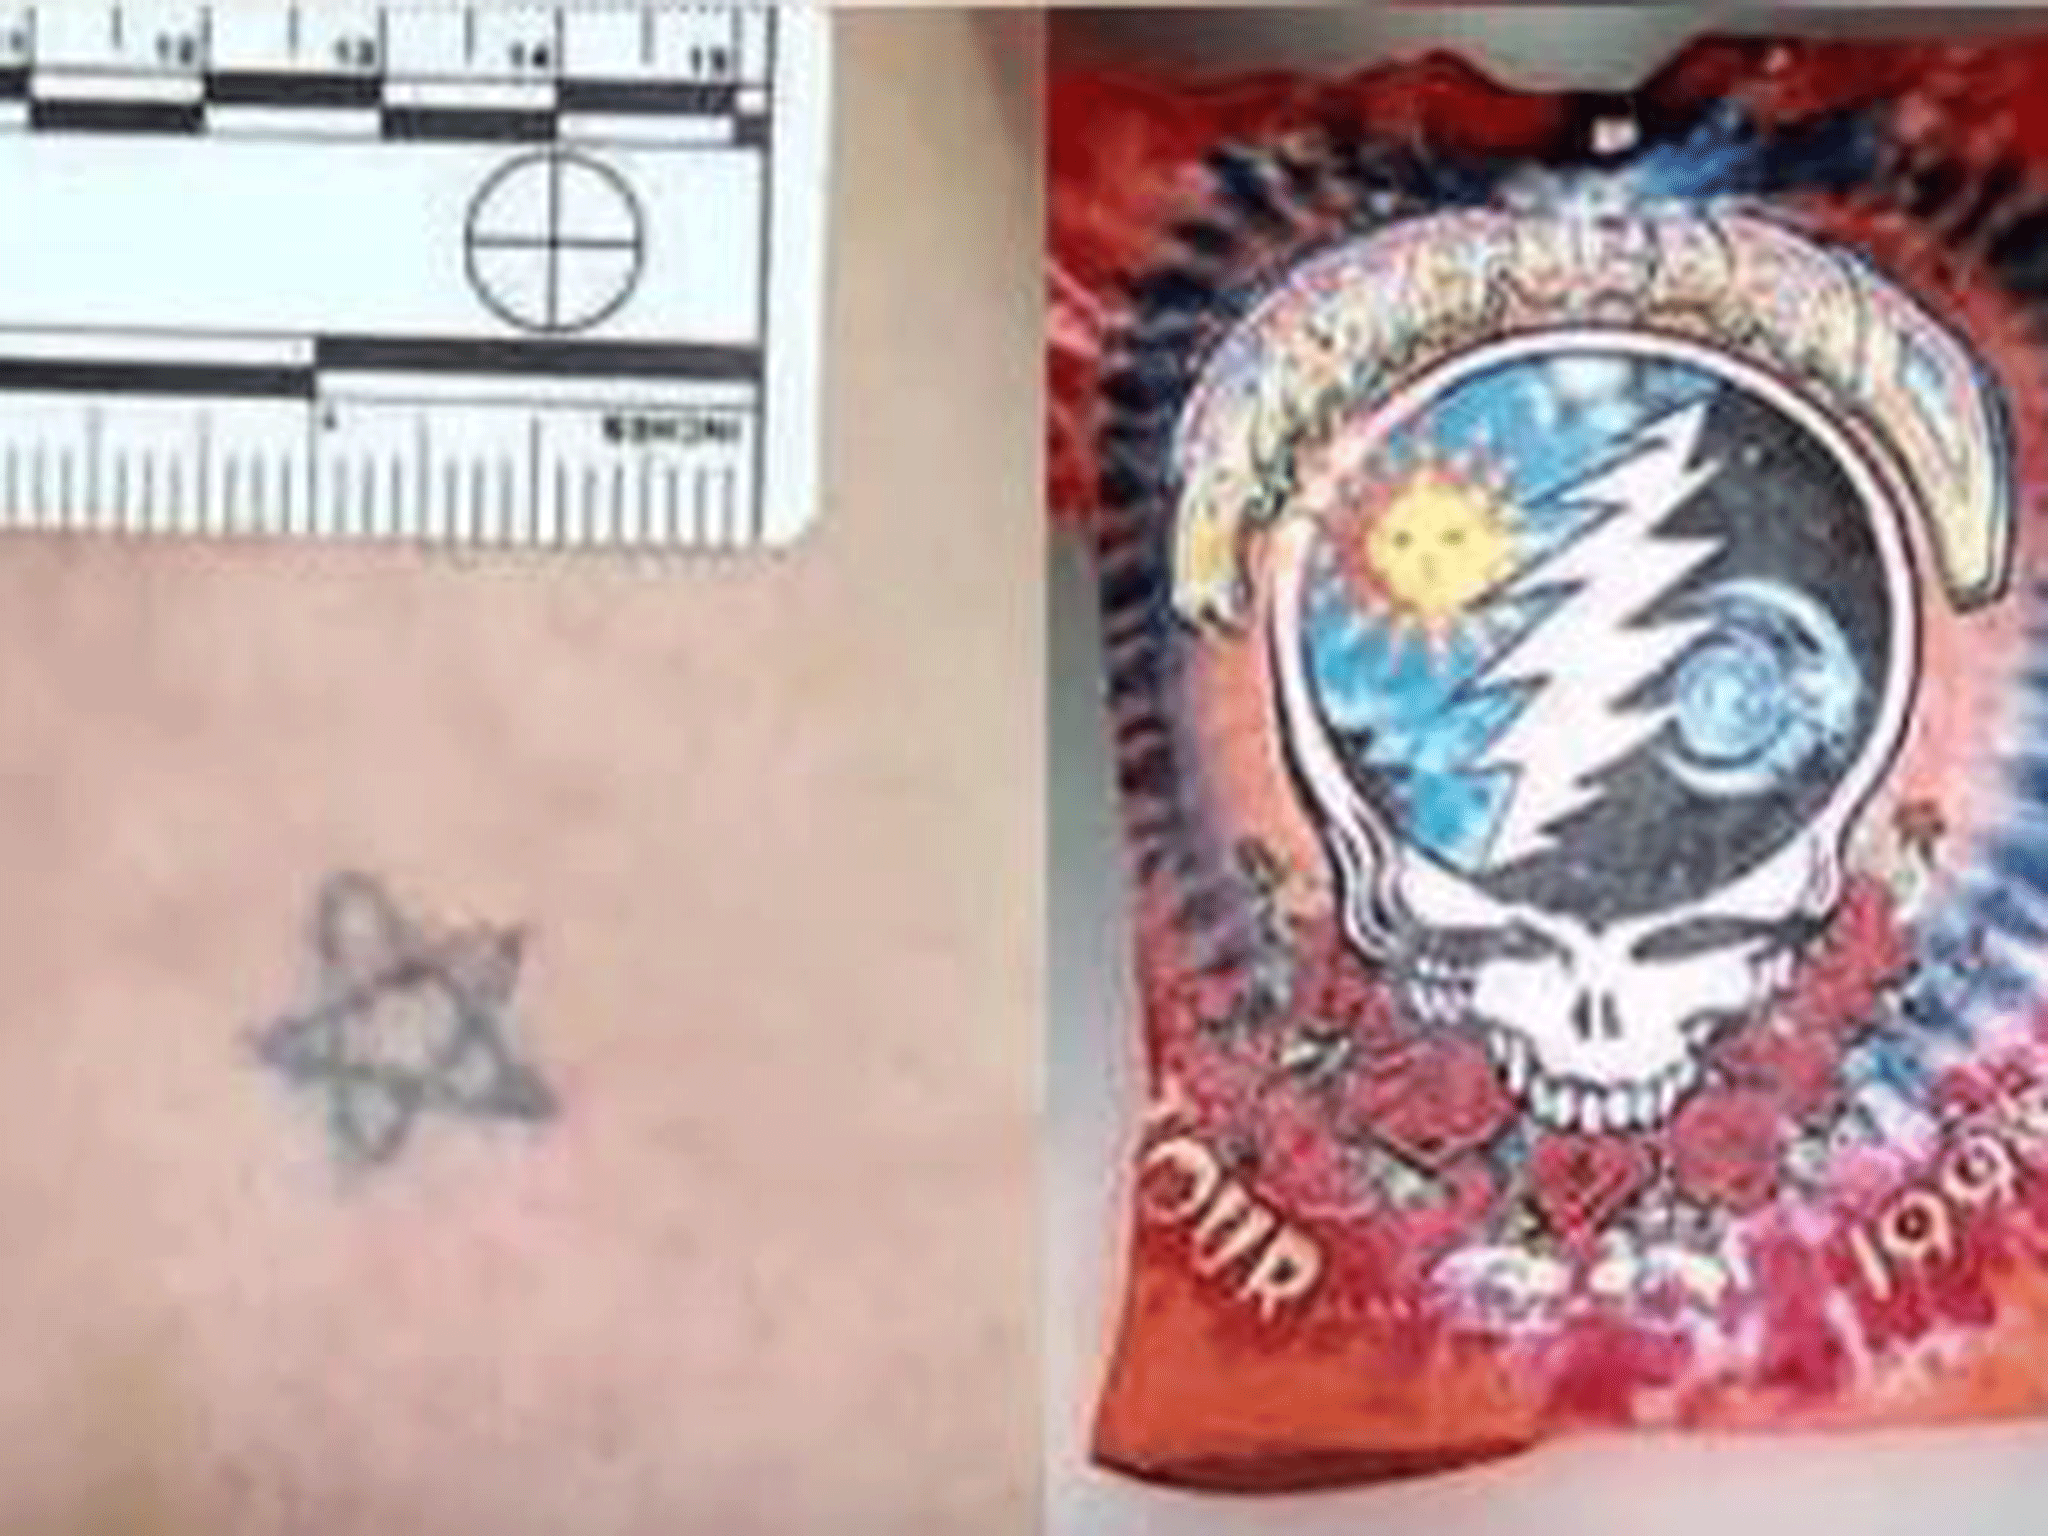 A star tattoo and a Grateful Dead T-shirt were two clues for identifying the young man